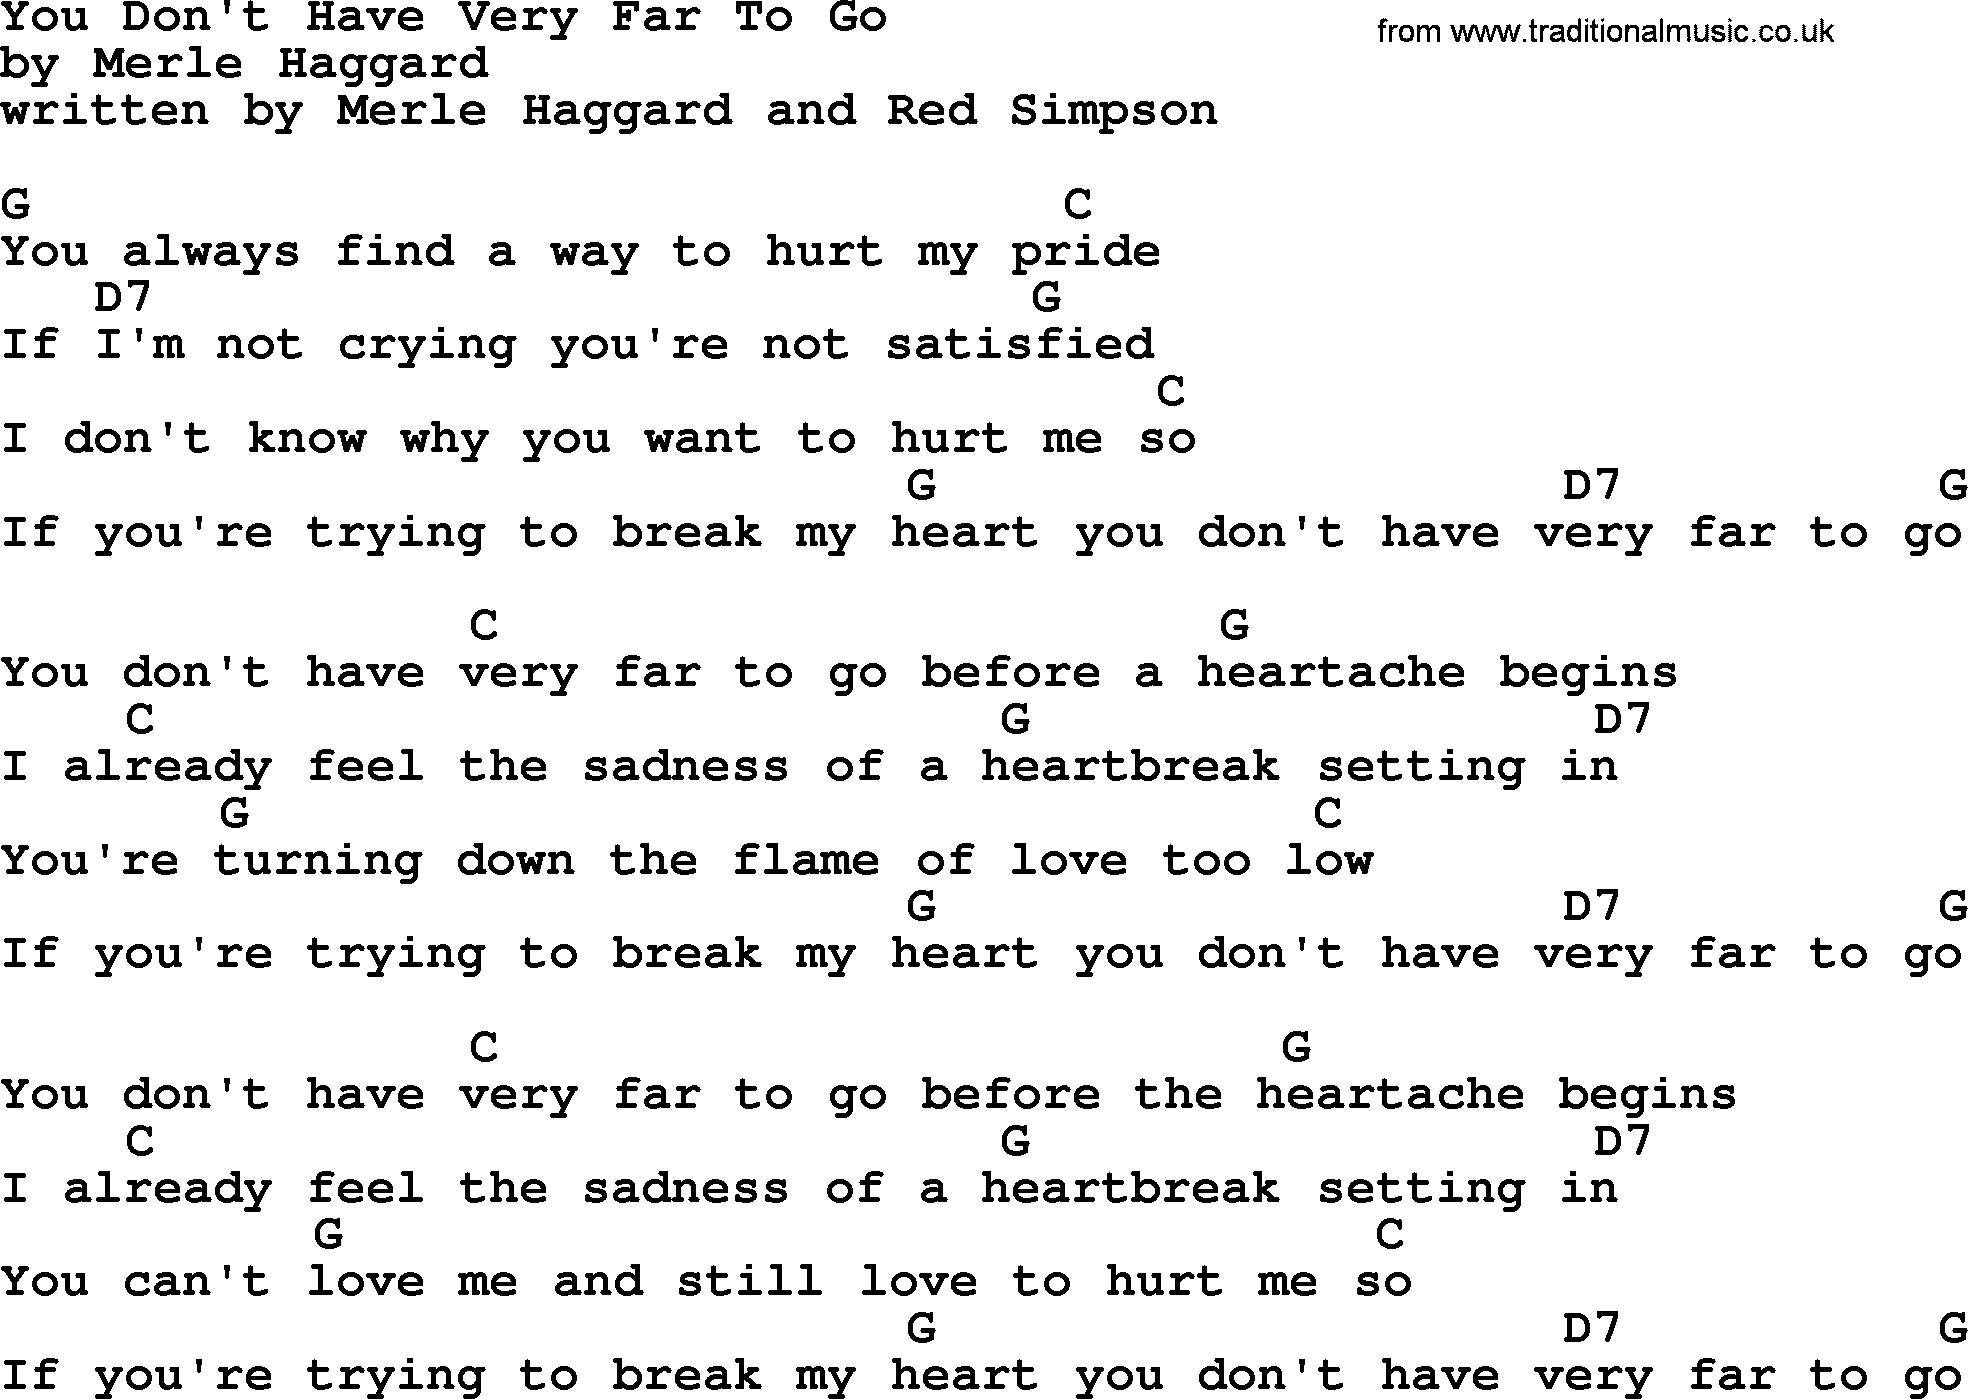 Merle Haggard song: You Don't Have Very Far To Go, lyrics and chords